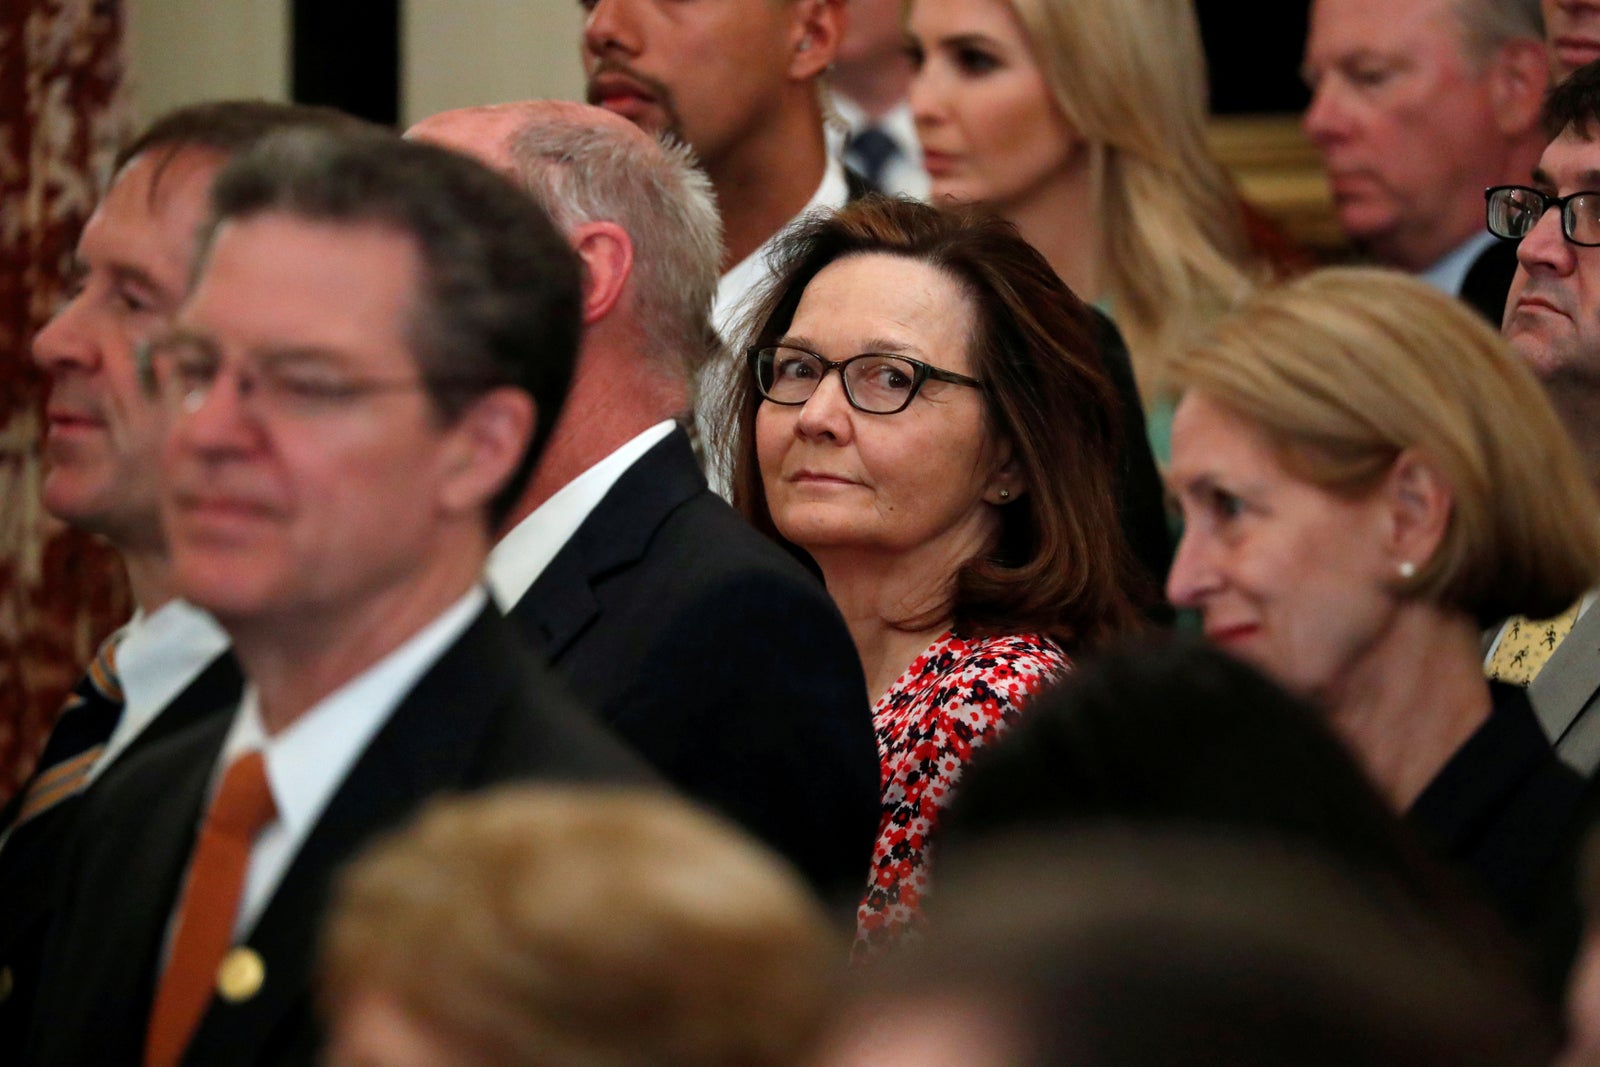 Gina Haspel Reportedly Offered To Withdraw Nomination To Lead Cia Over Torture Concerns 0462